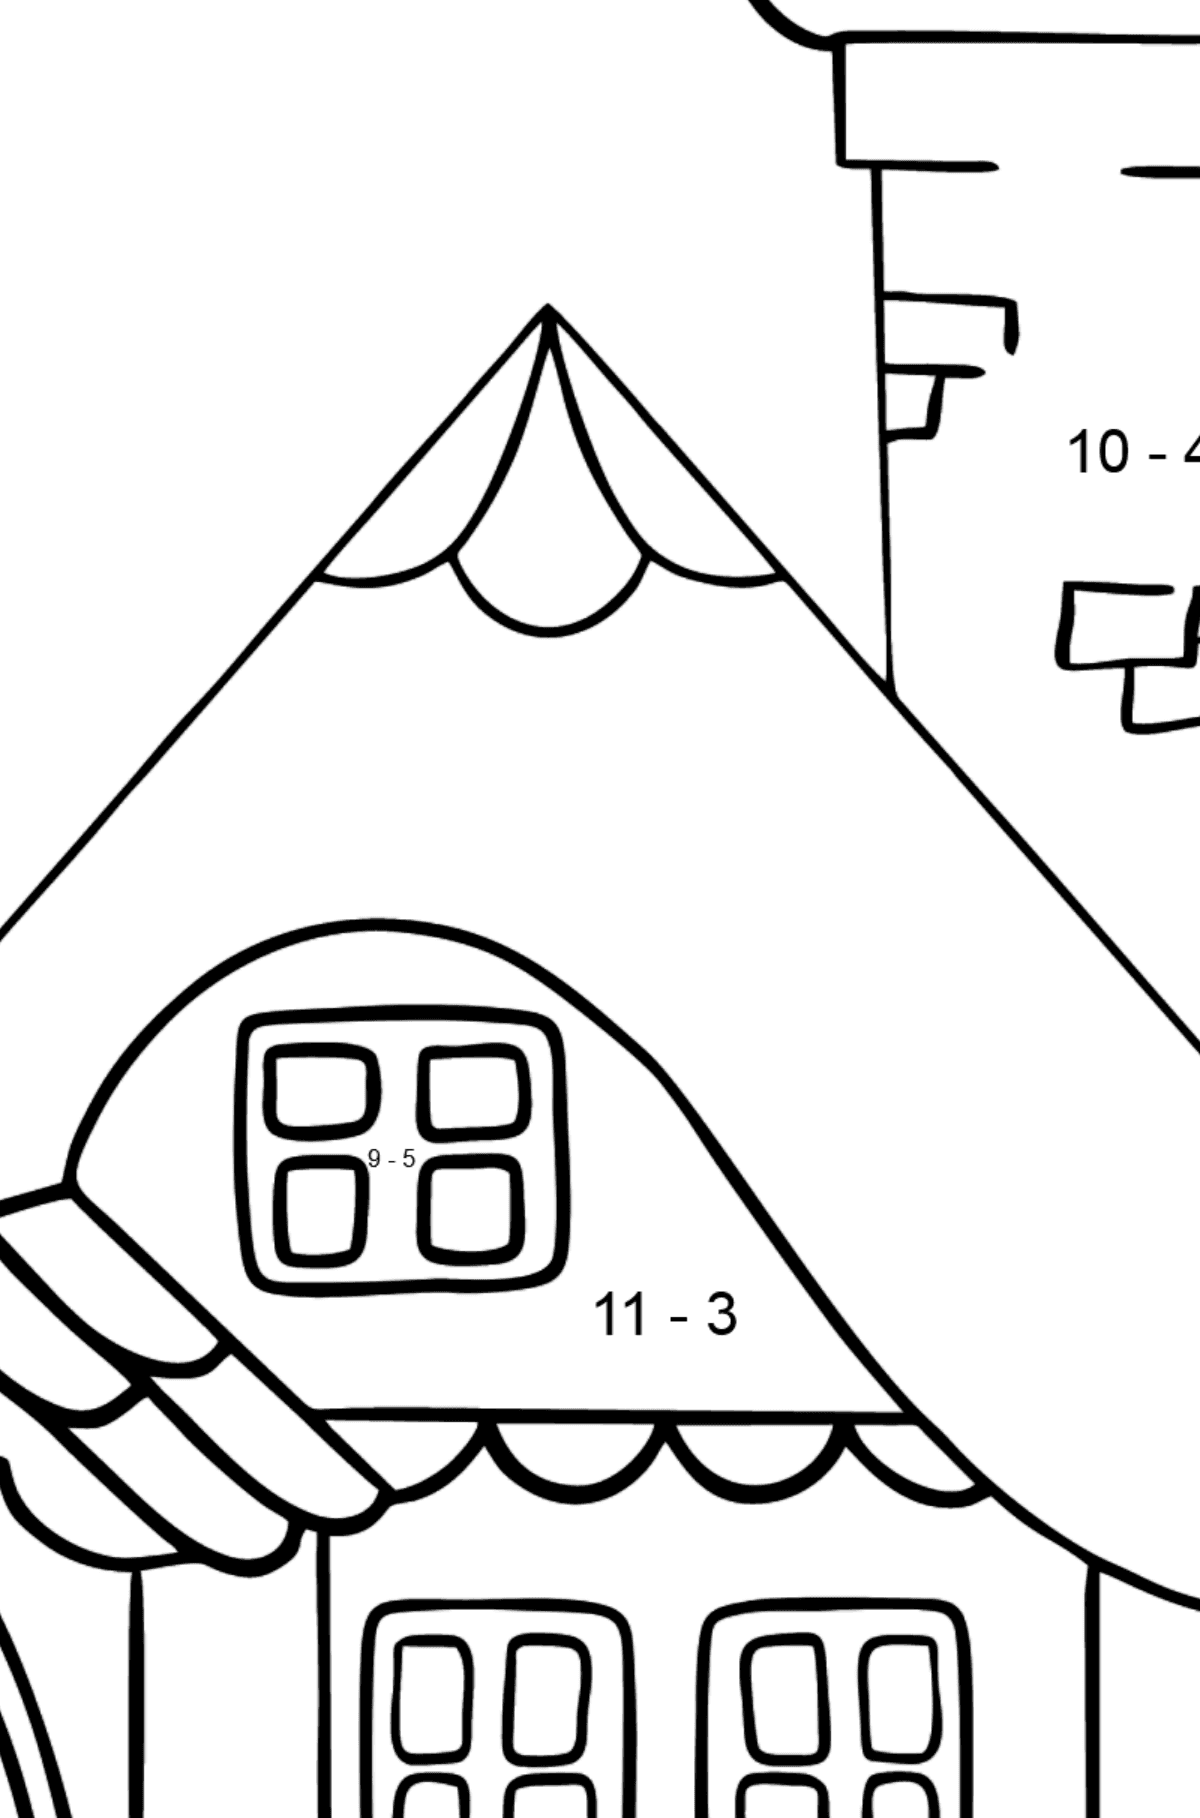 Simple Coloring Page - A Wonderful House - Math Coloring - Subtraction for Kids